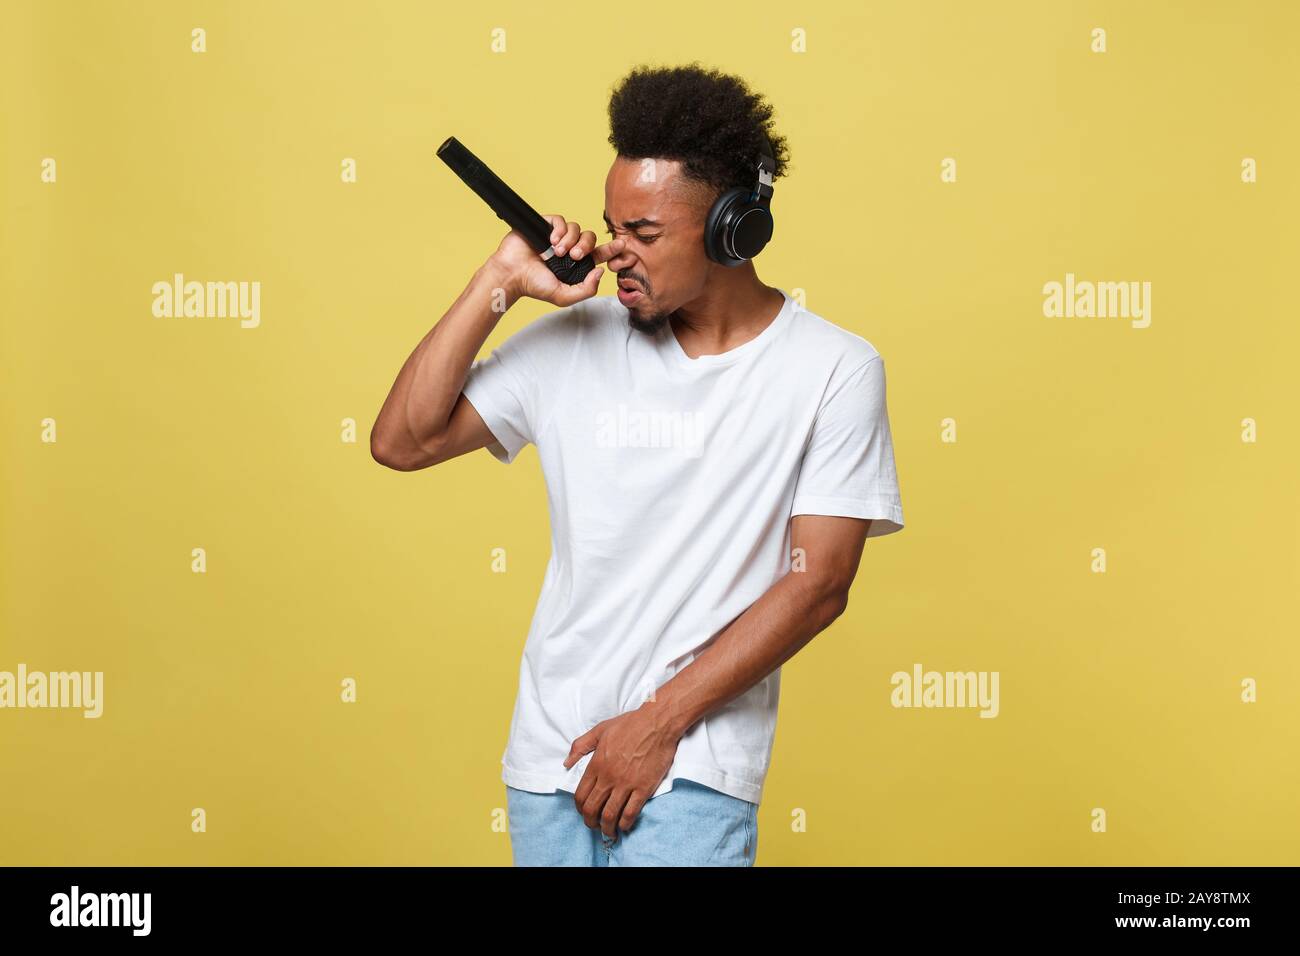 Attractive young dark-skinned man with afro haircut in white t shirt, gesticulating with hands and microphone, dancing and singi Stock Photo